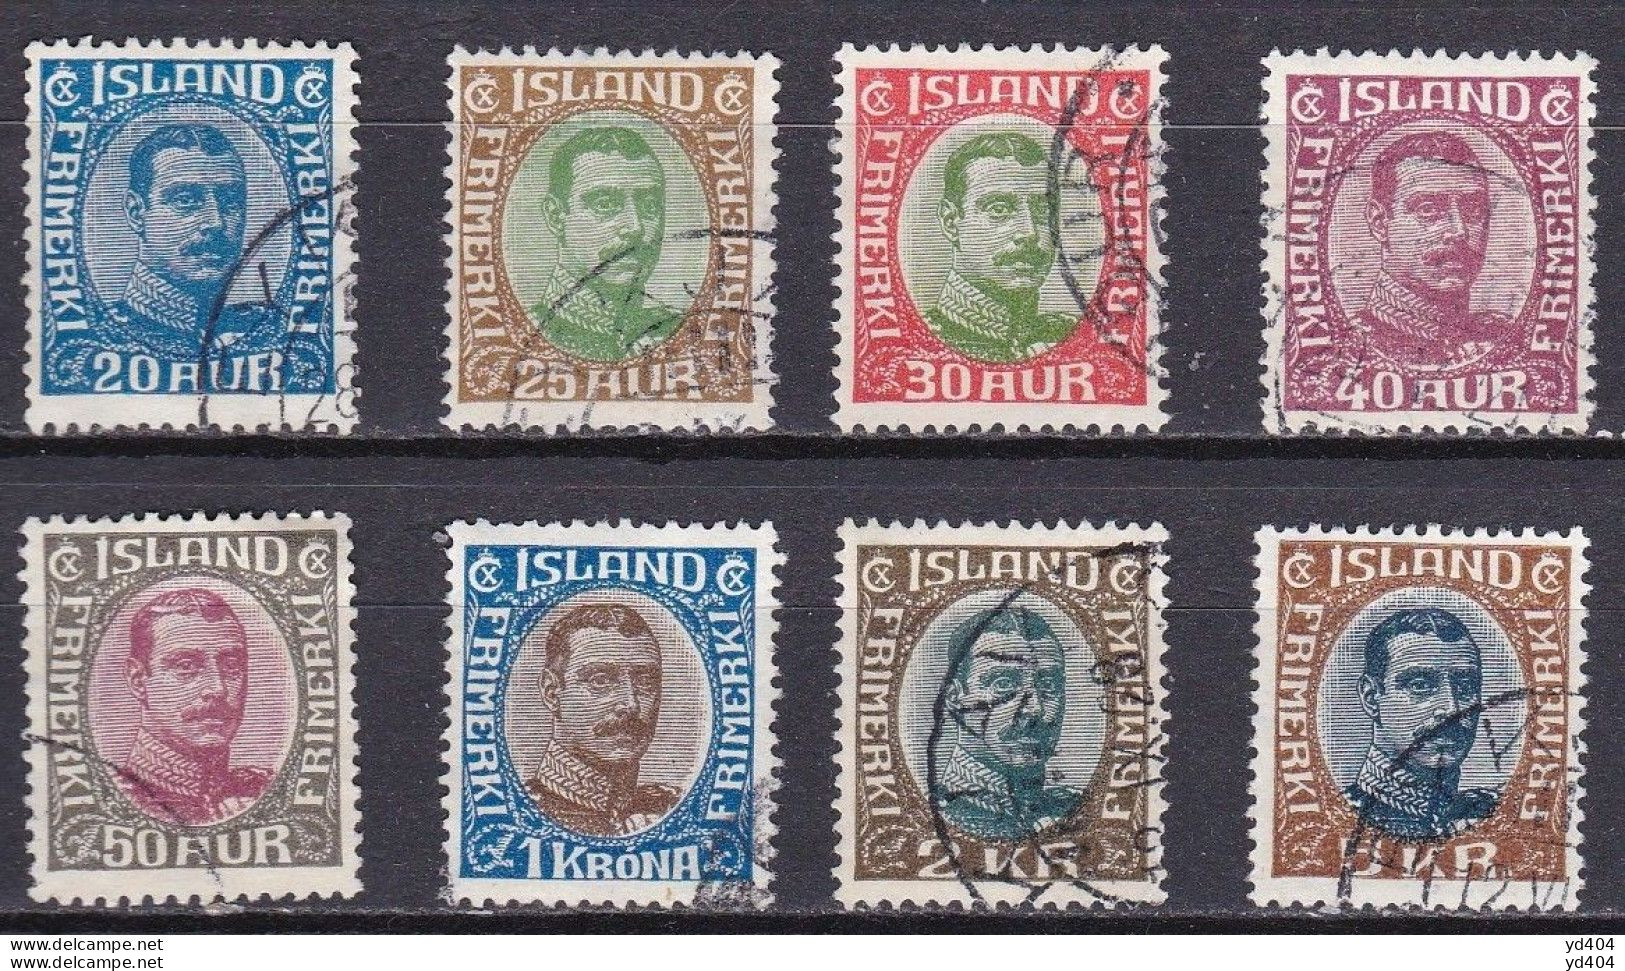 IS015 – ISLANDE – ICELAND – 1920 – KING CHRISTIAN X FULL SET – Y&T # 82/97 USED 115 € - Used Stamps